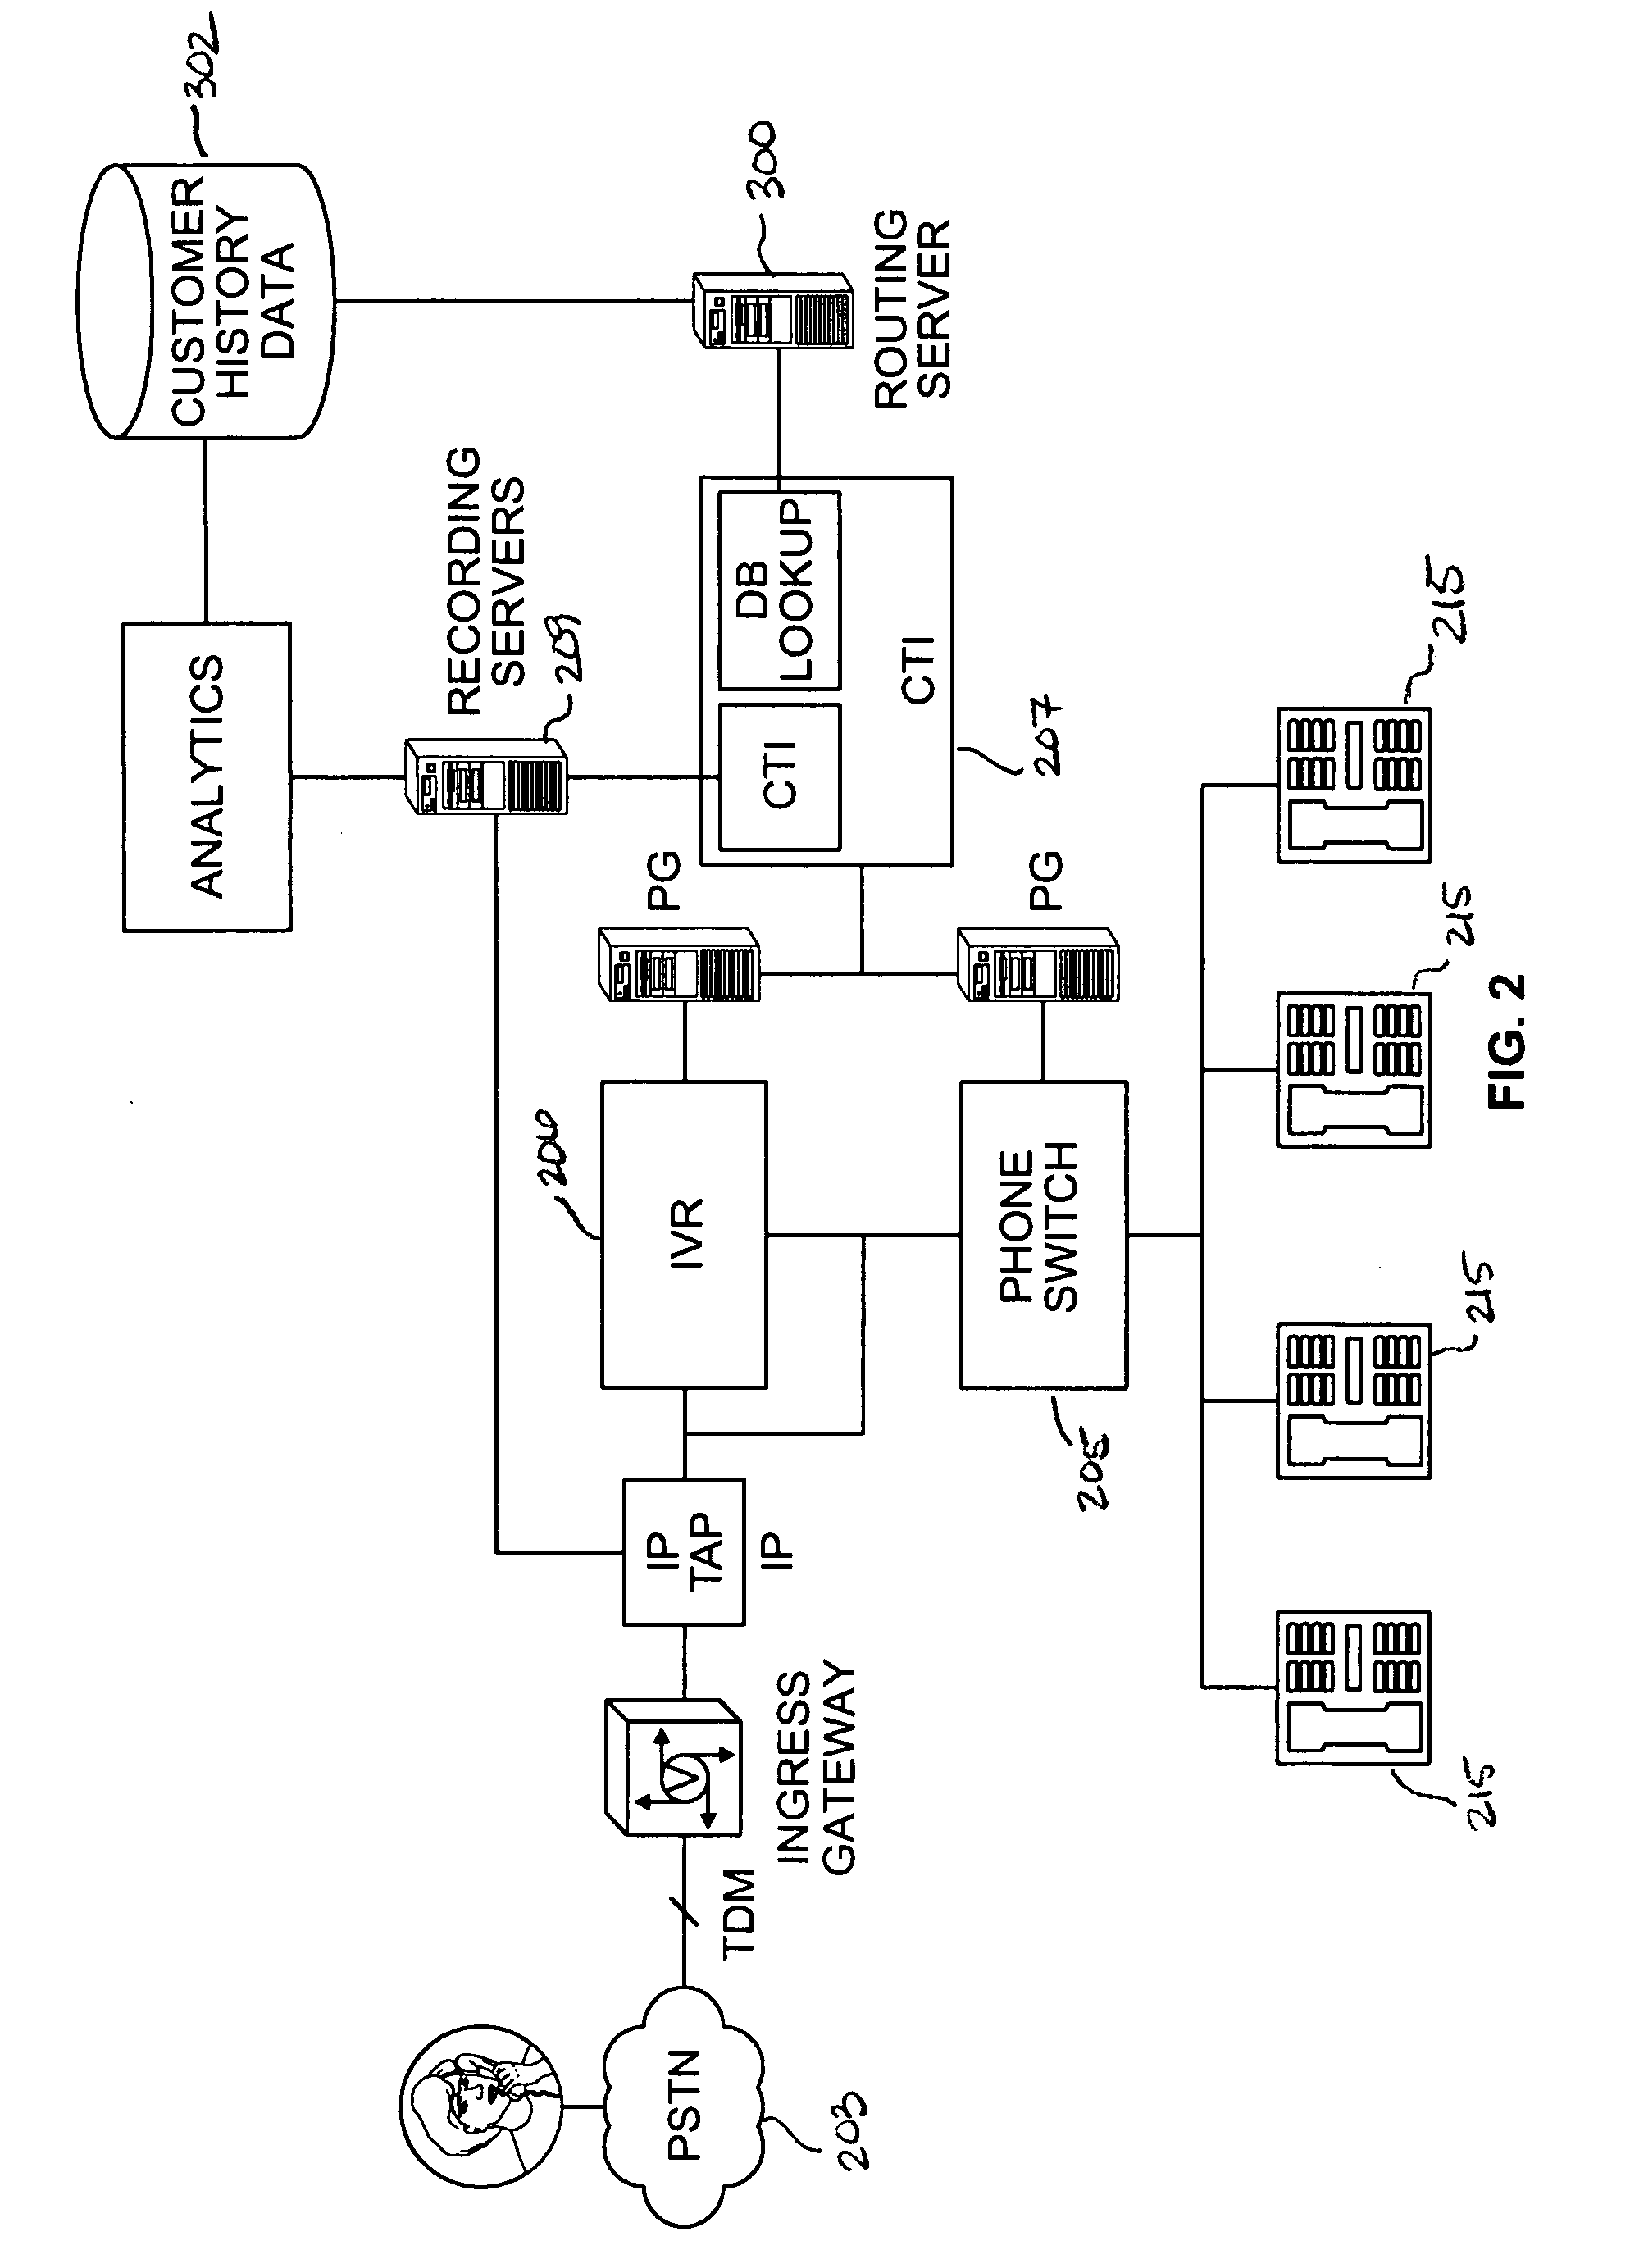 Method and system for automatically routing a telephonic communication base on analytic attributes associated with prior telephonic communication